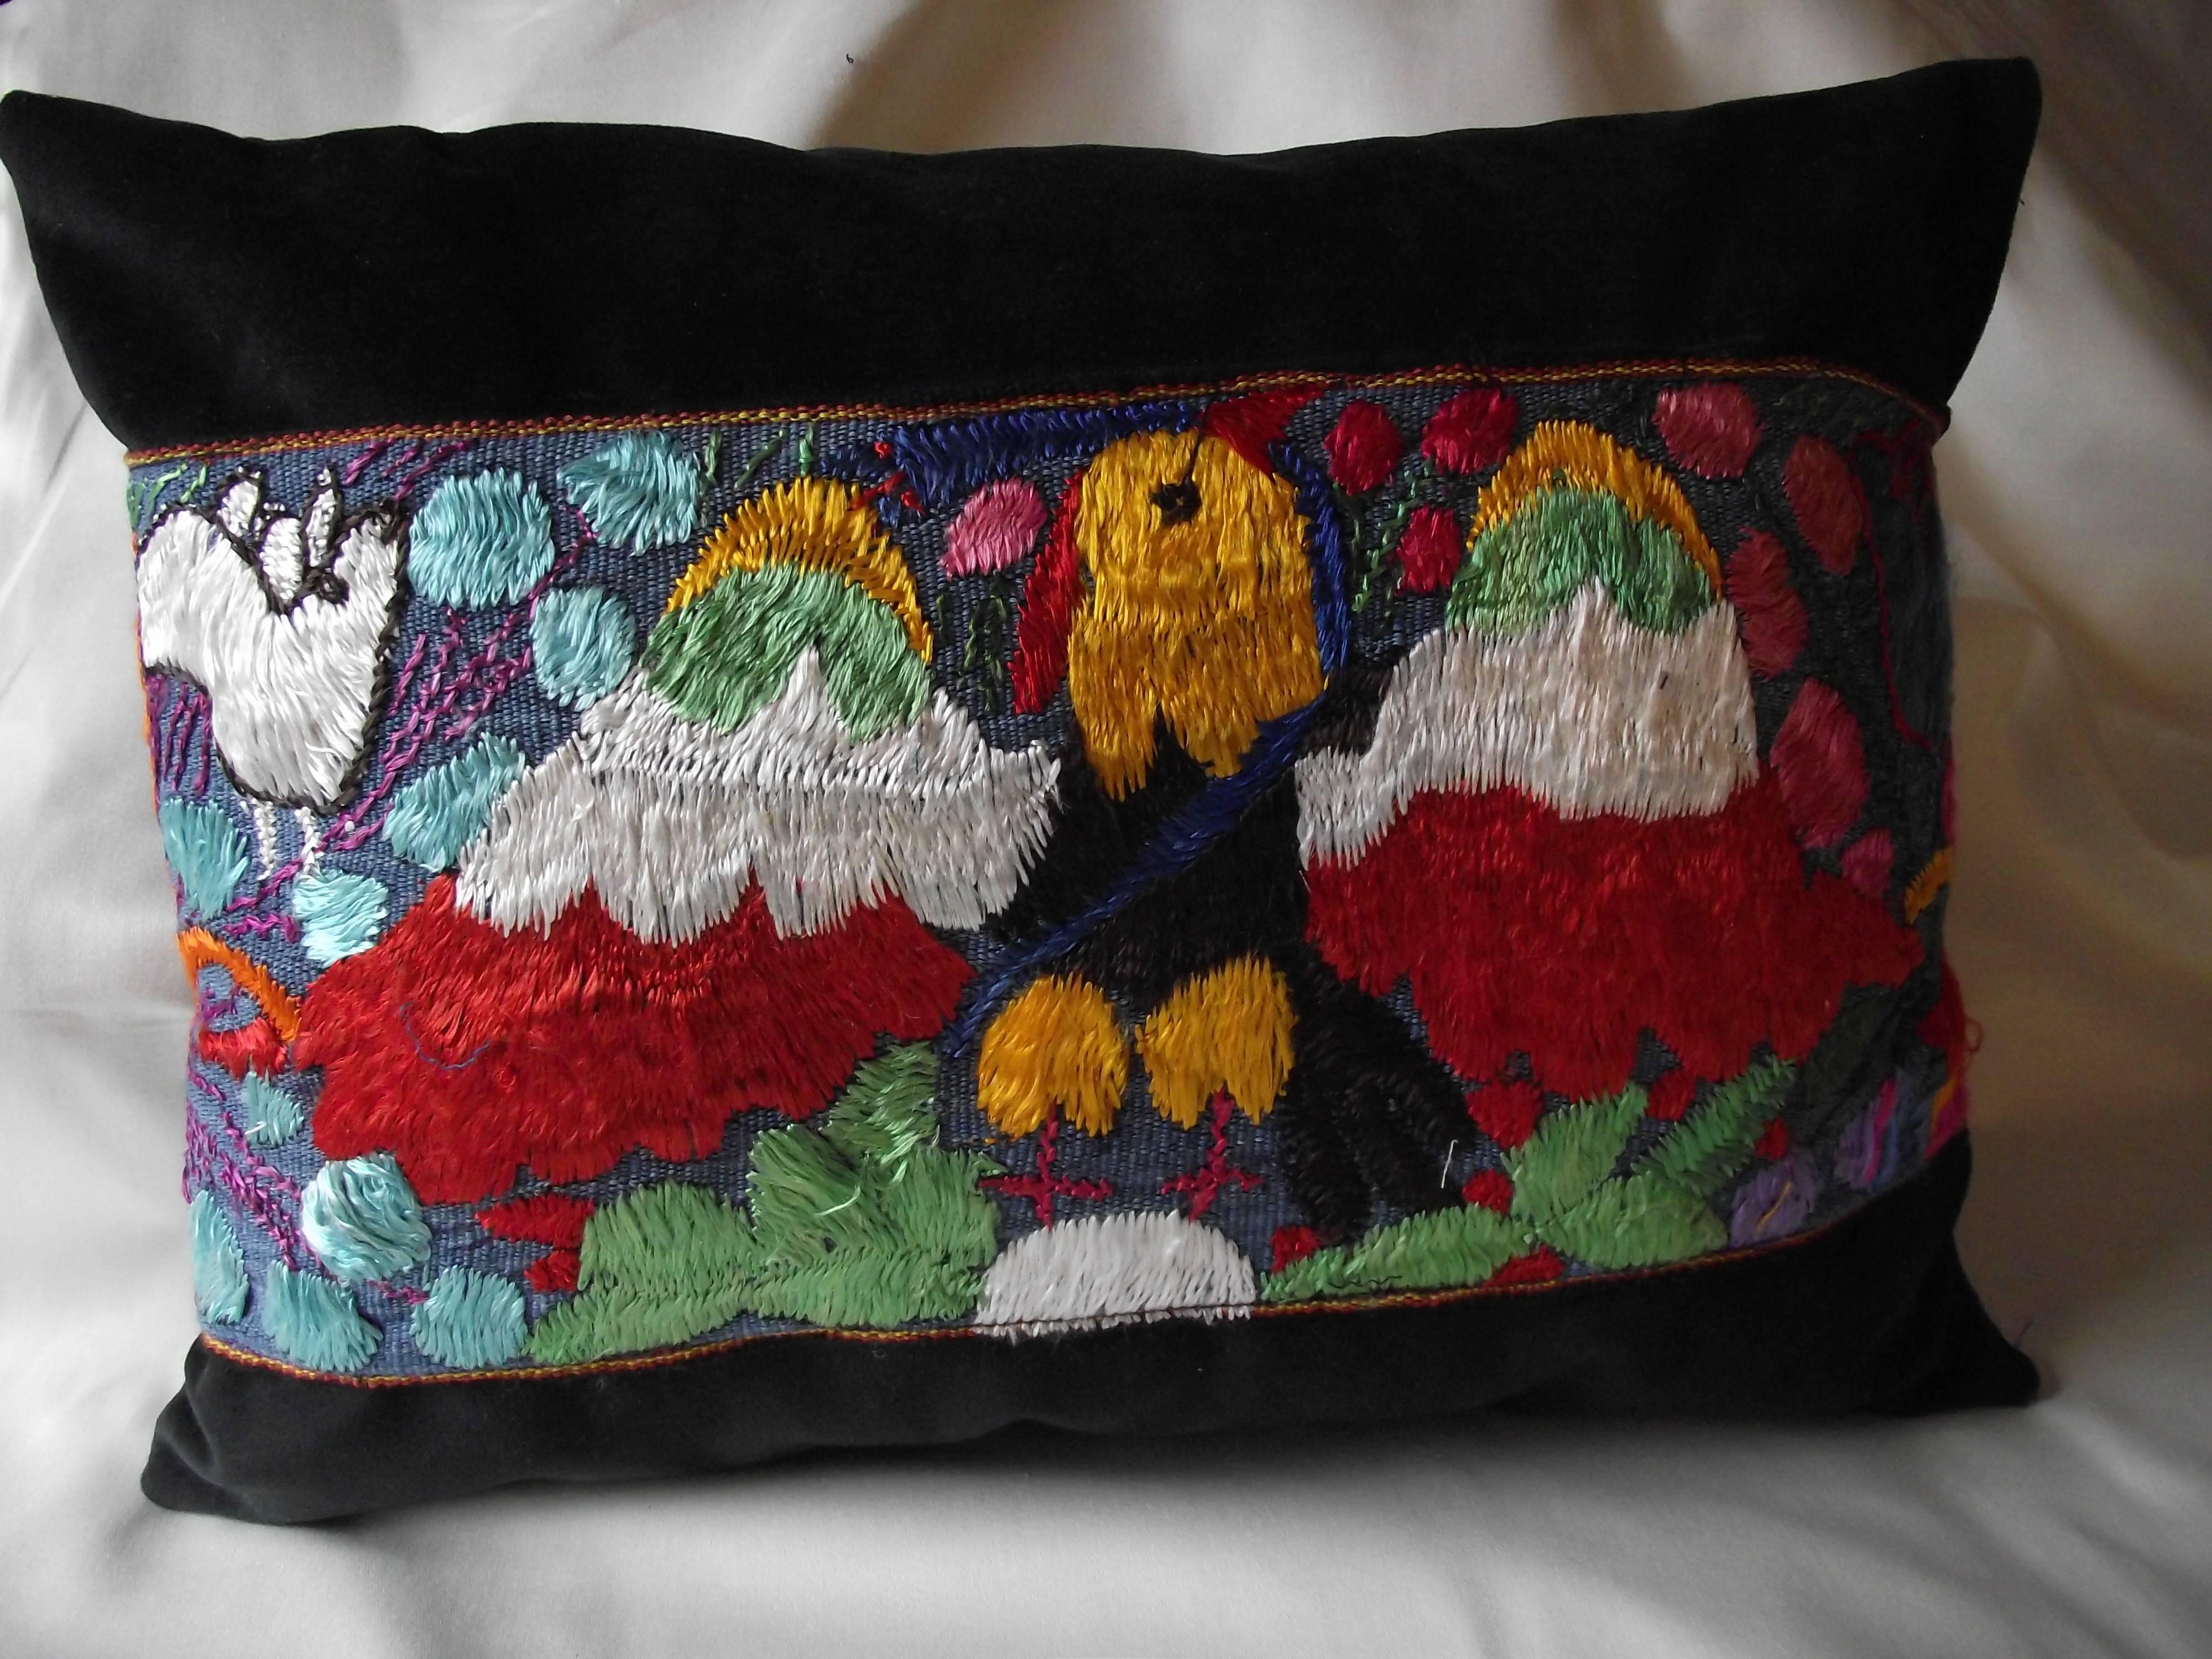 This unusual Lumbar Pillow is made from embroidered decoration from Antique Peruvian Ceremonial Cloth. The pillow itself is made of 100,000 double rub black velvet. The case has an invisible velcro closure giving access to the pillow form